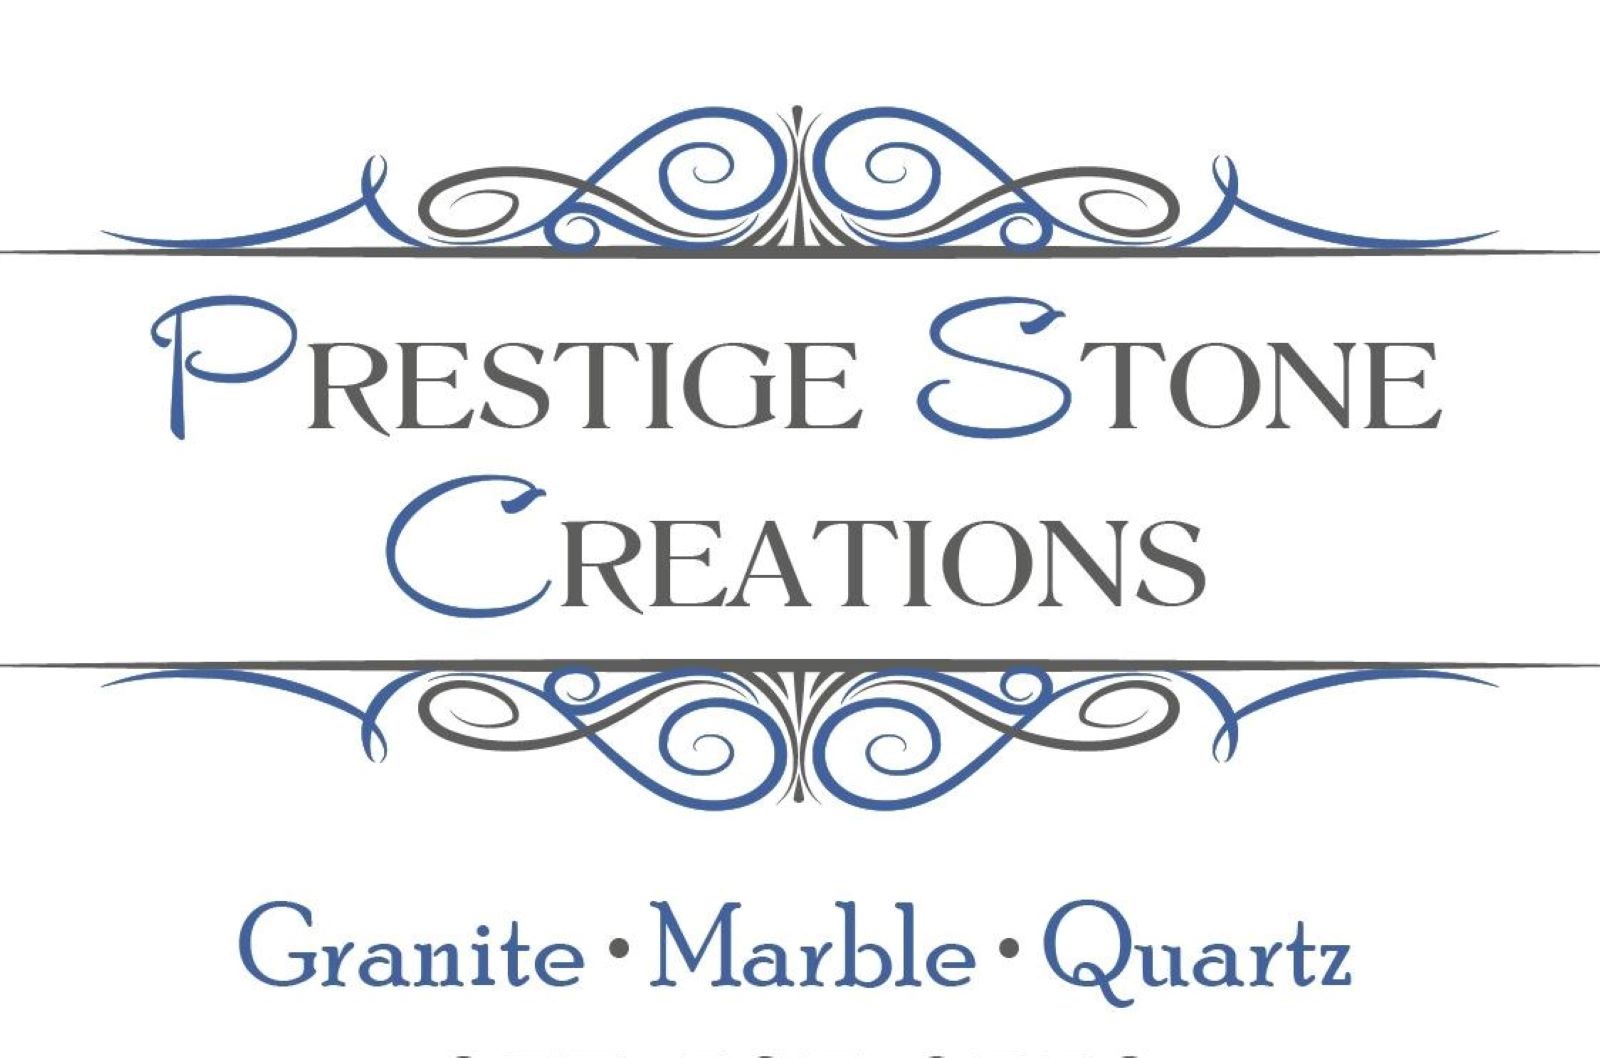 WELCOME TO PRESTIGE STONE CREATIONS